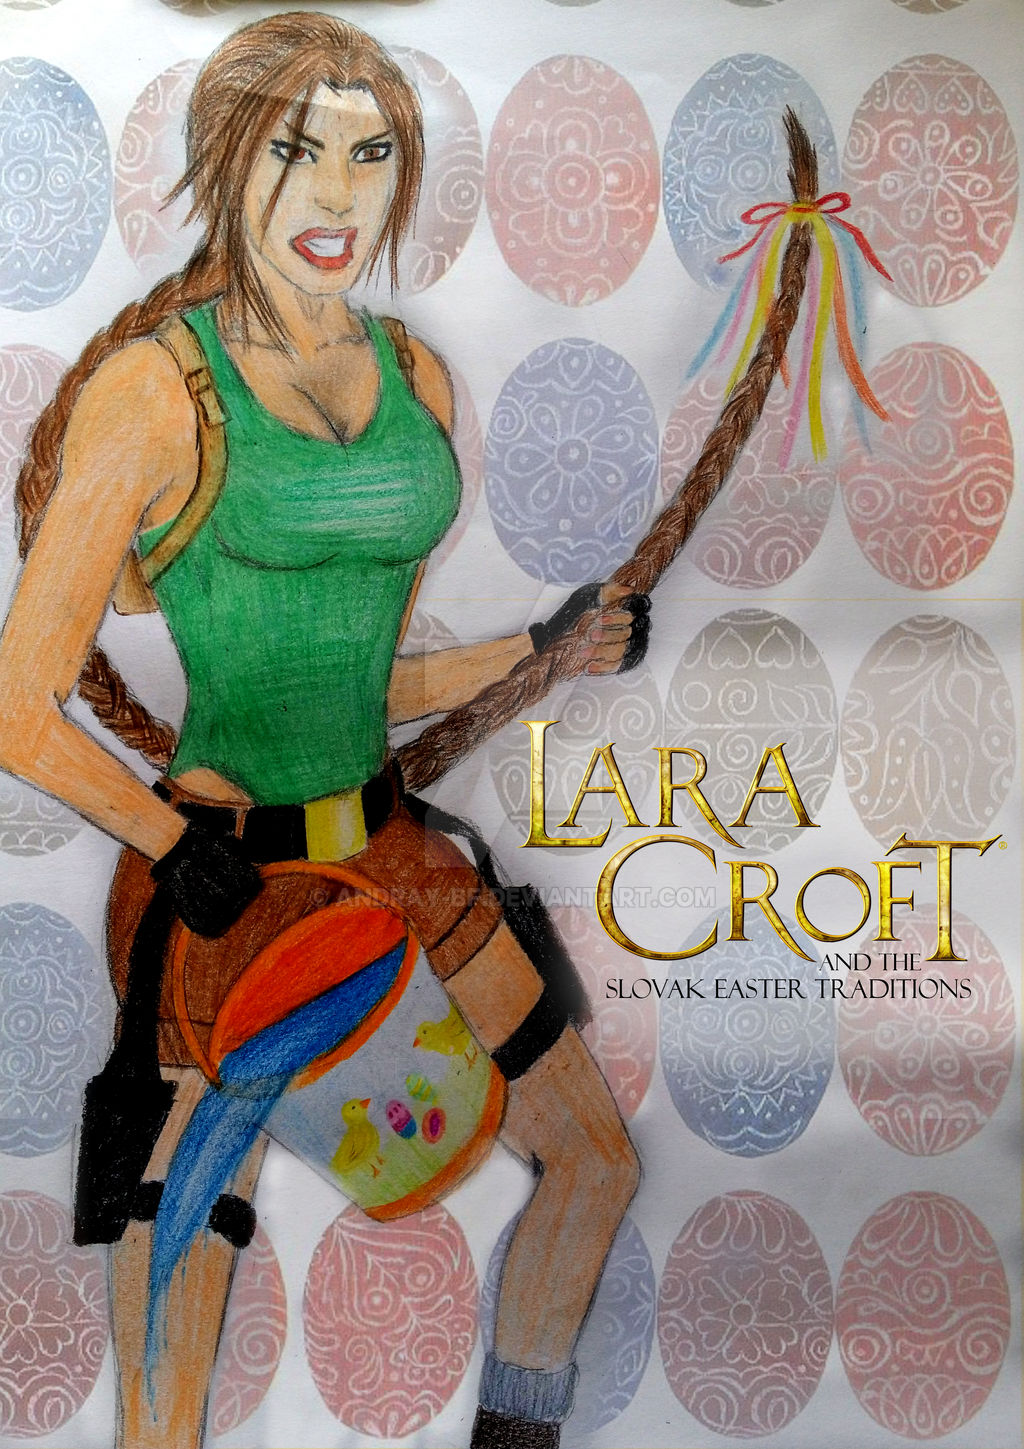 Lara Croft and the Slovak Easter Traditions